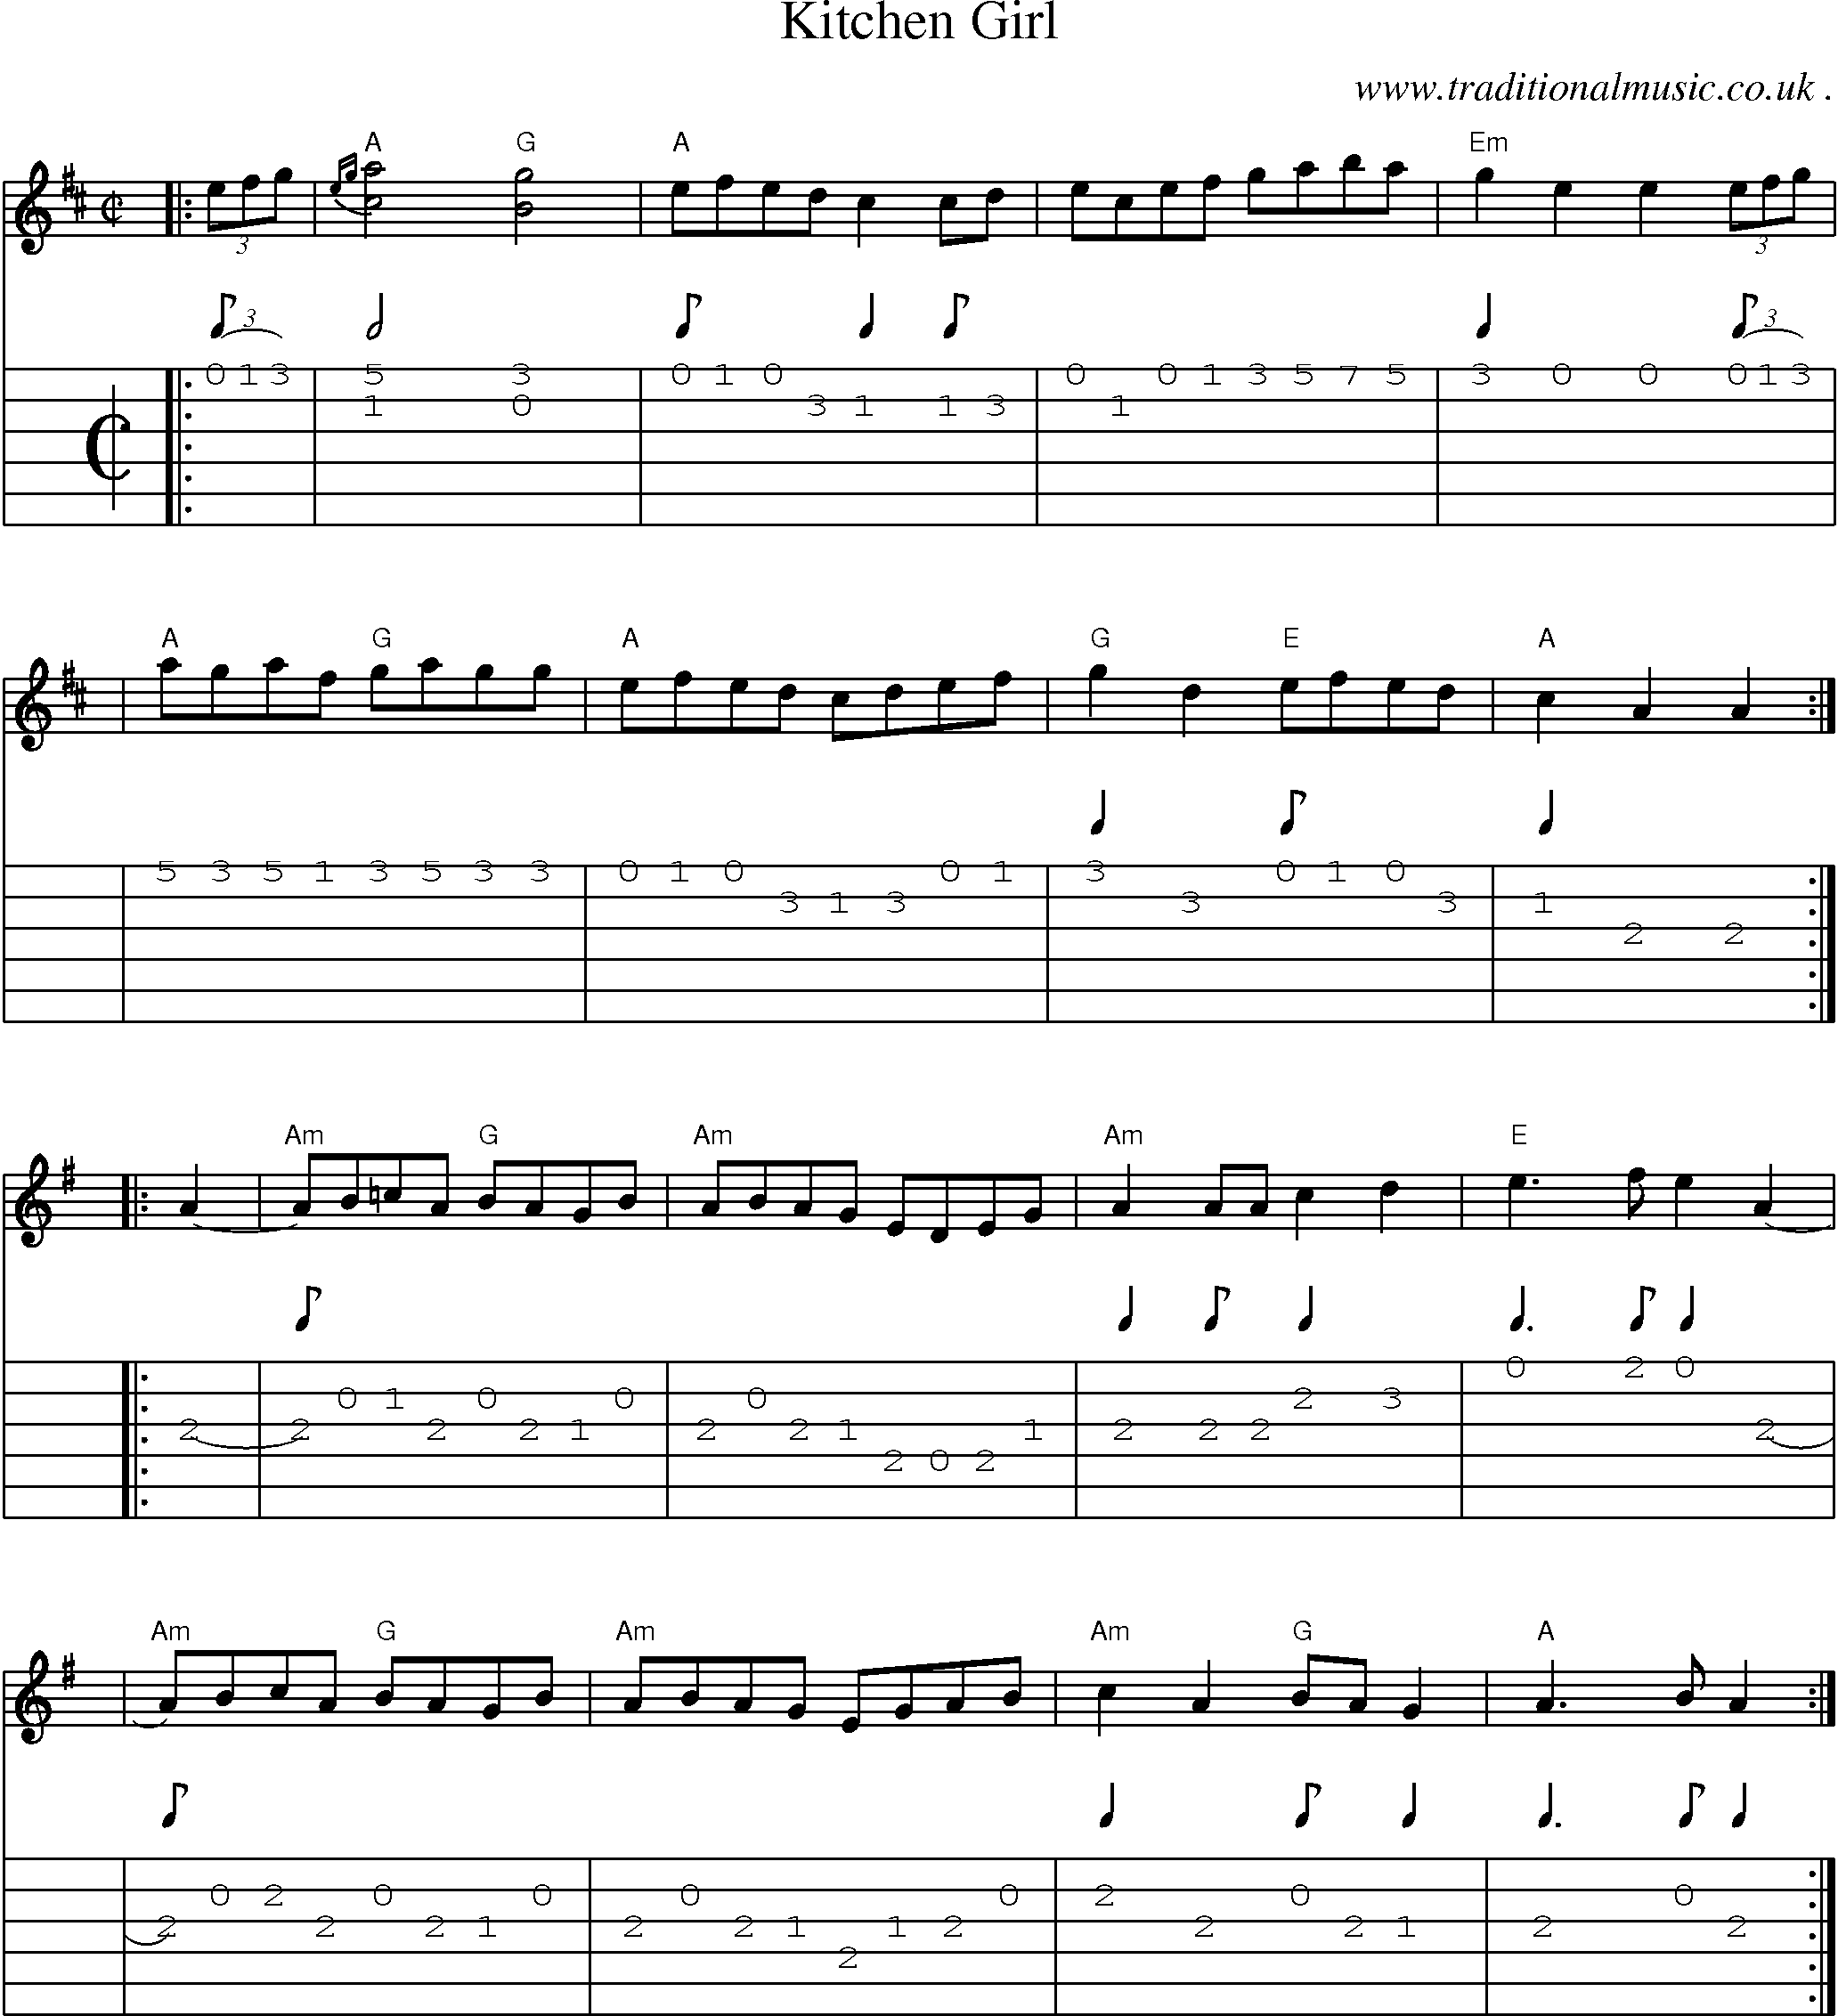 Music Score and Guitar Tabs for Kitchen Girl